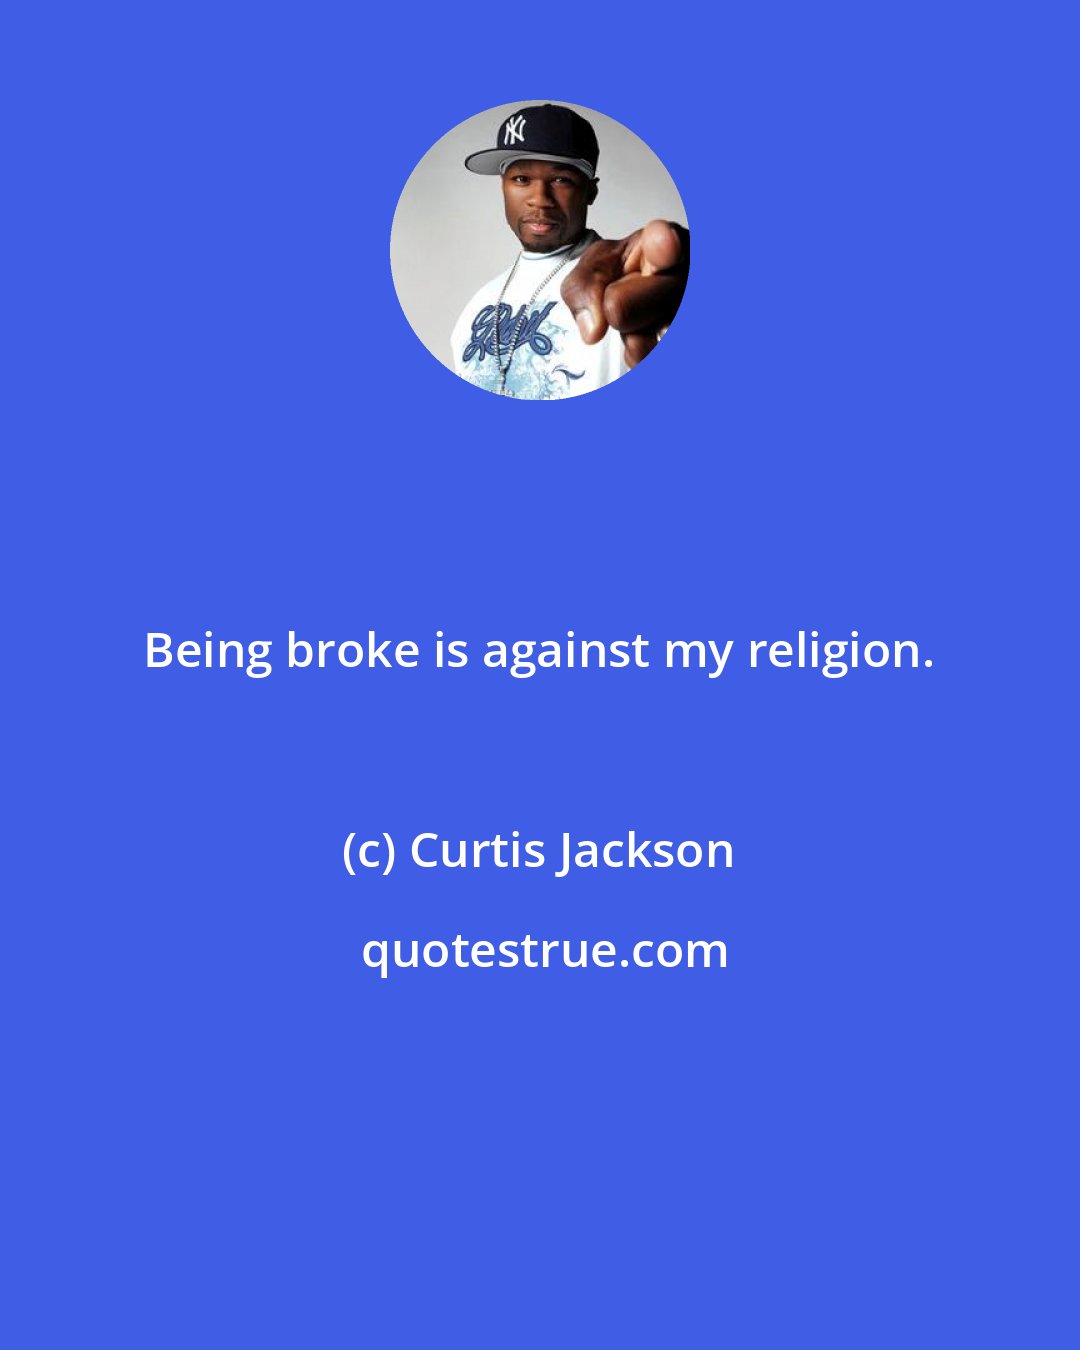 Curtis Jackson: Being broke is against my religion.